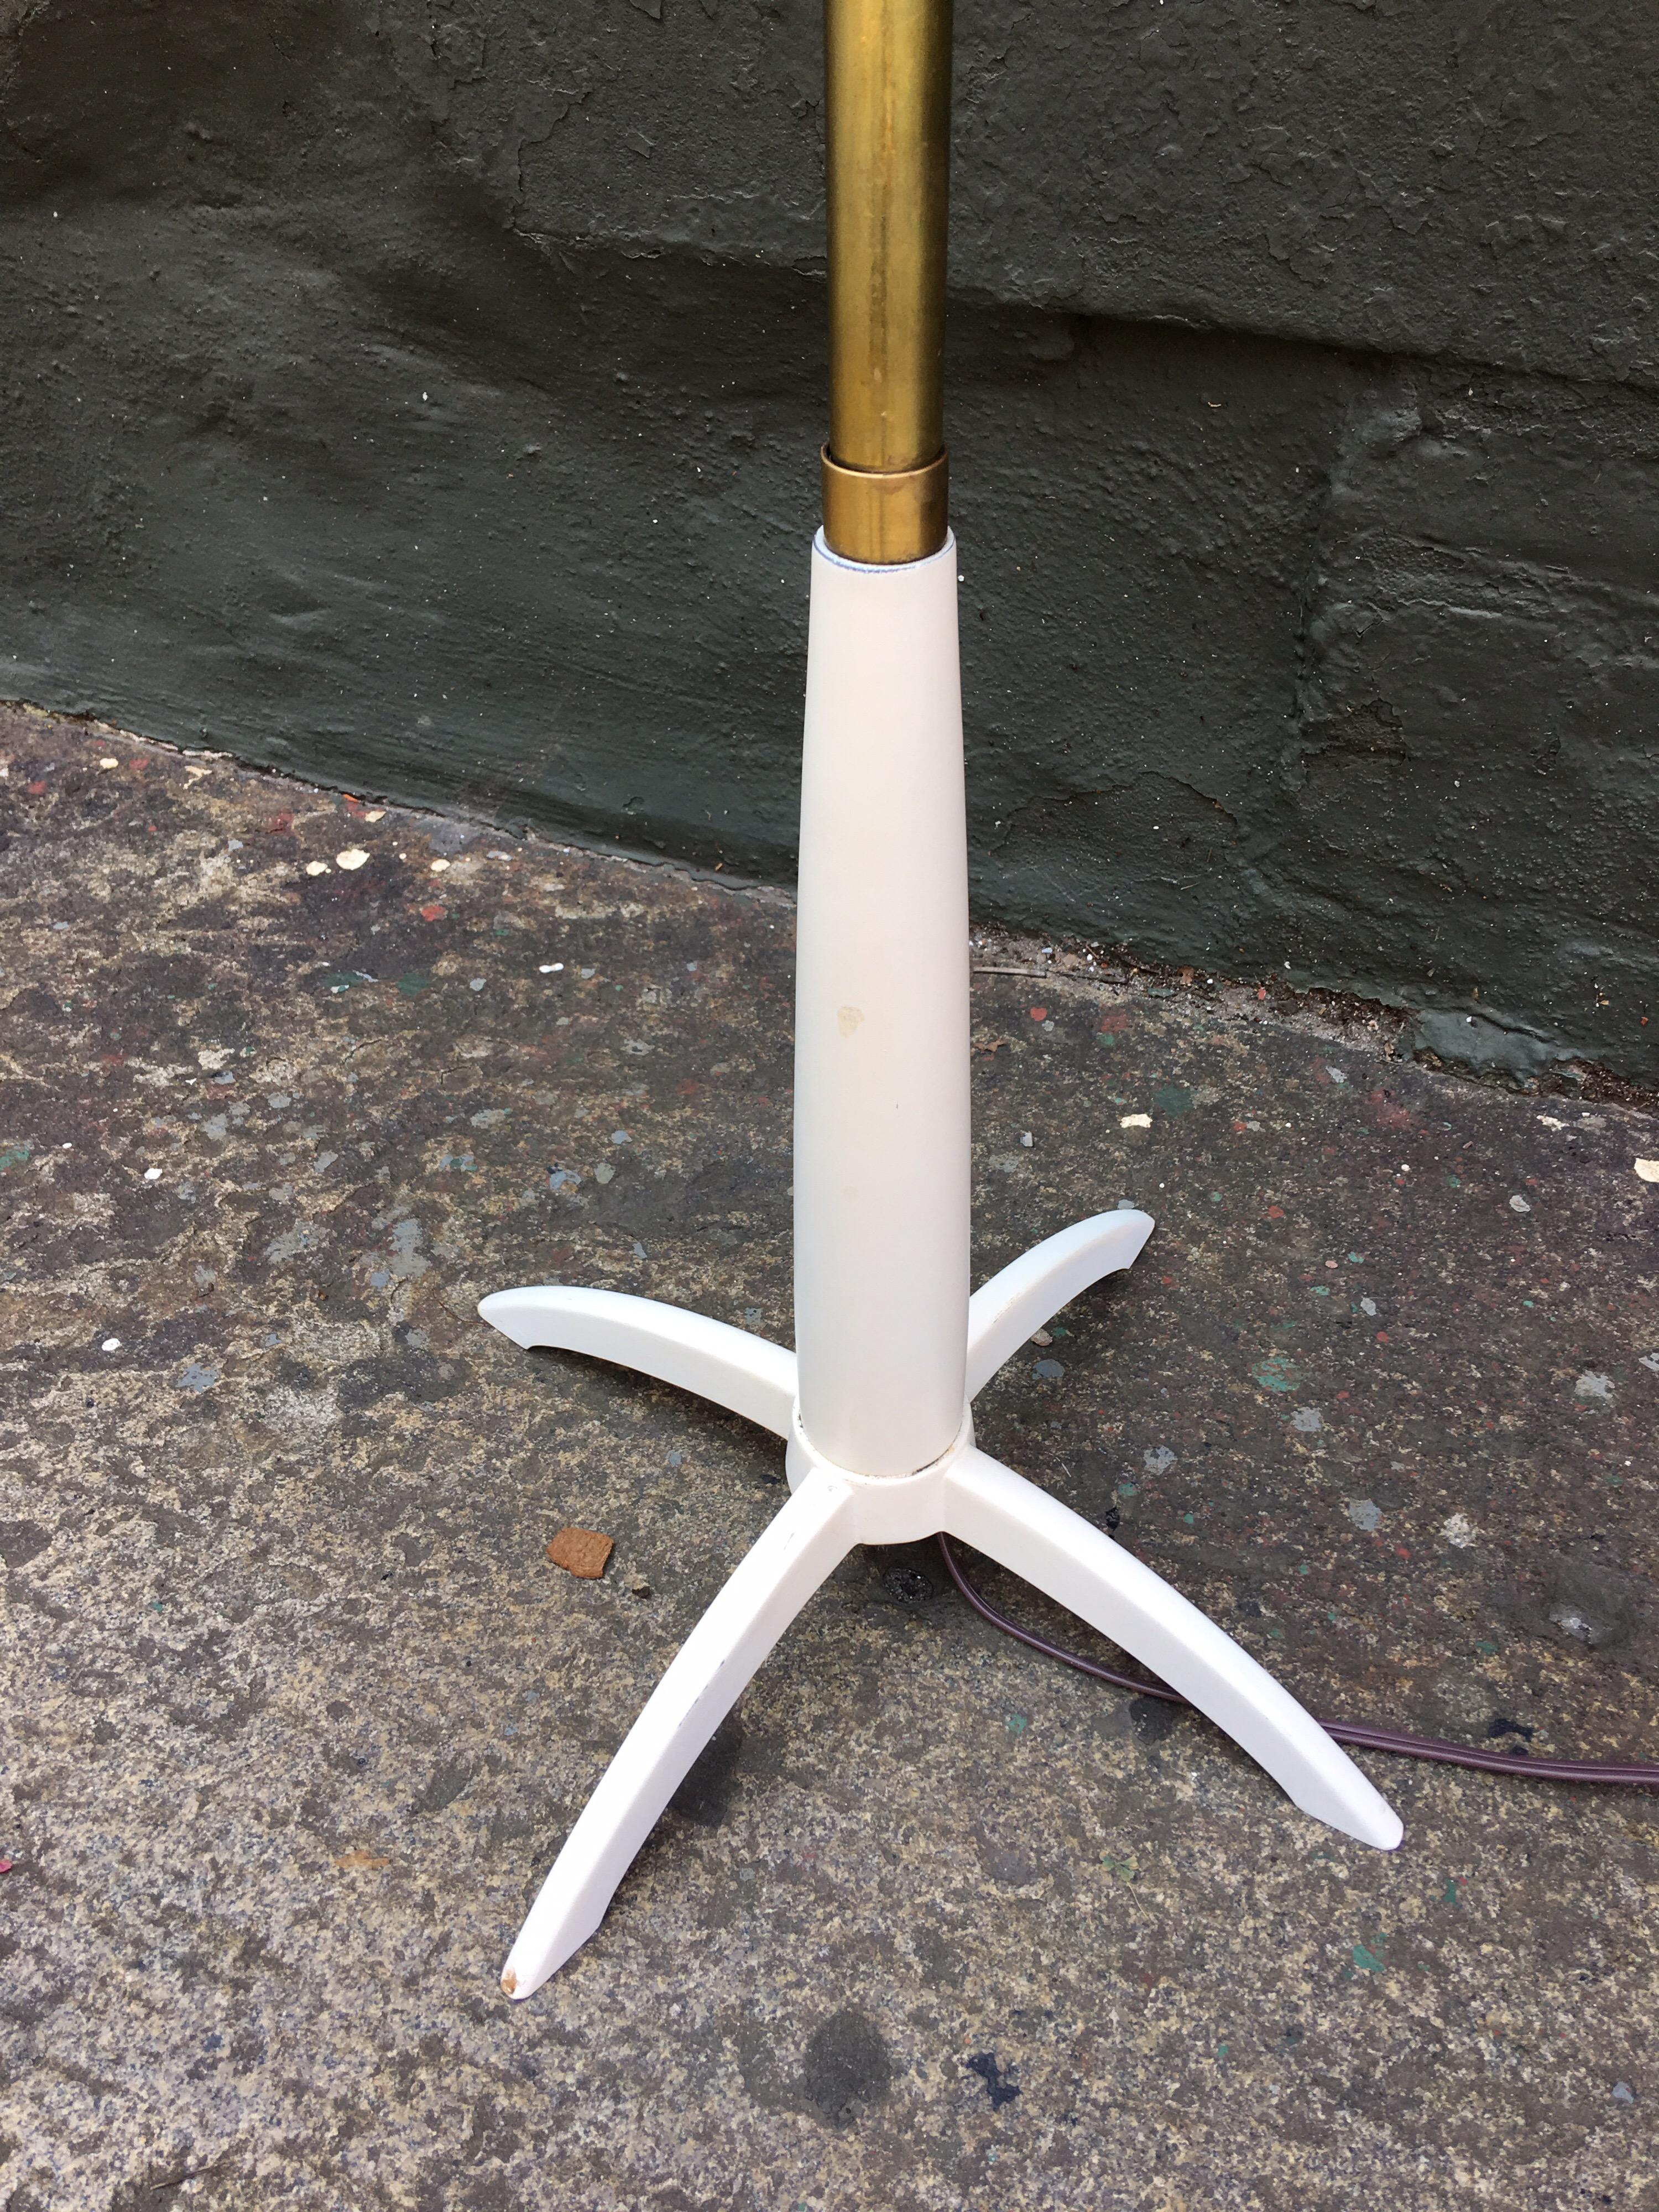 Stiffel floor lamp with original Maria Kipp shade. Brass pole with cream colored painted claw-foot base. Maria Kipp shade has several broken tips to woven sticks. Overall presents very well.